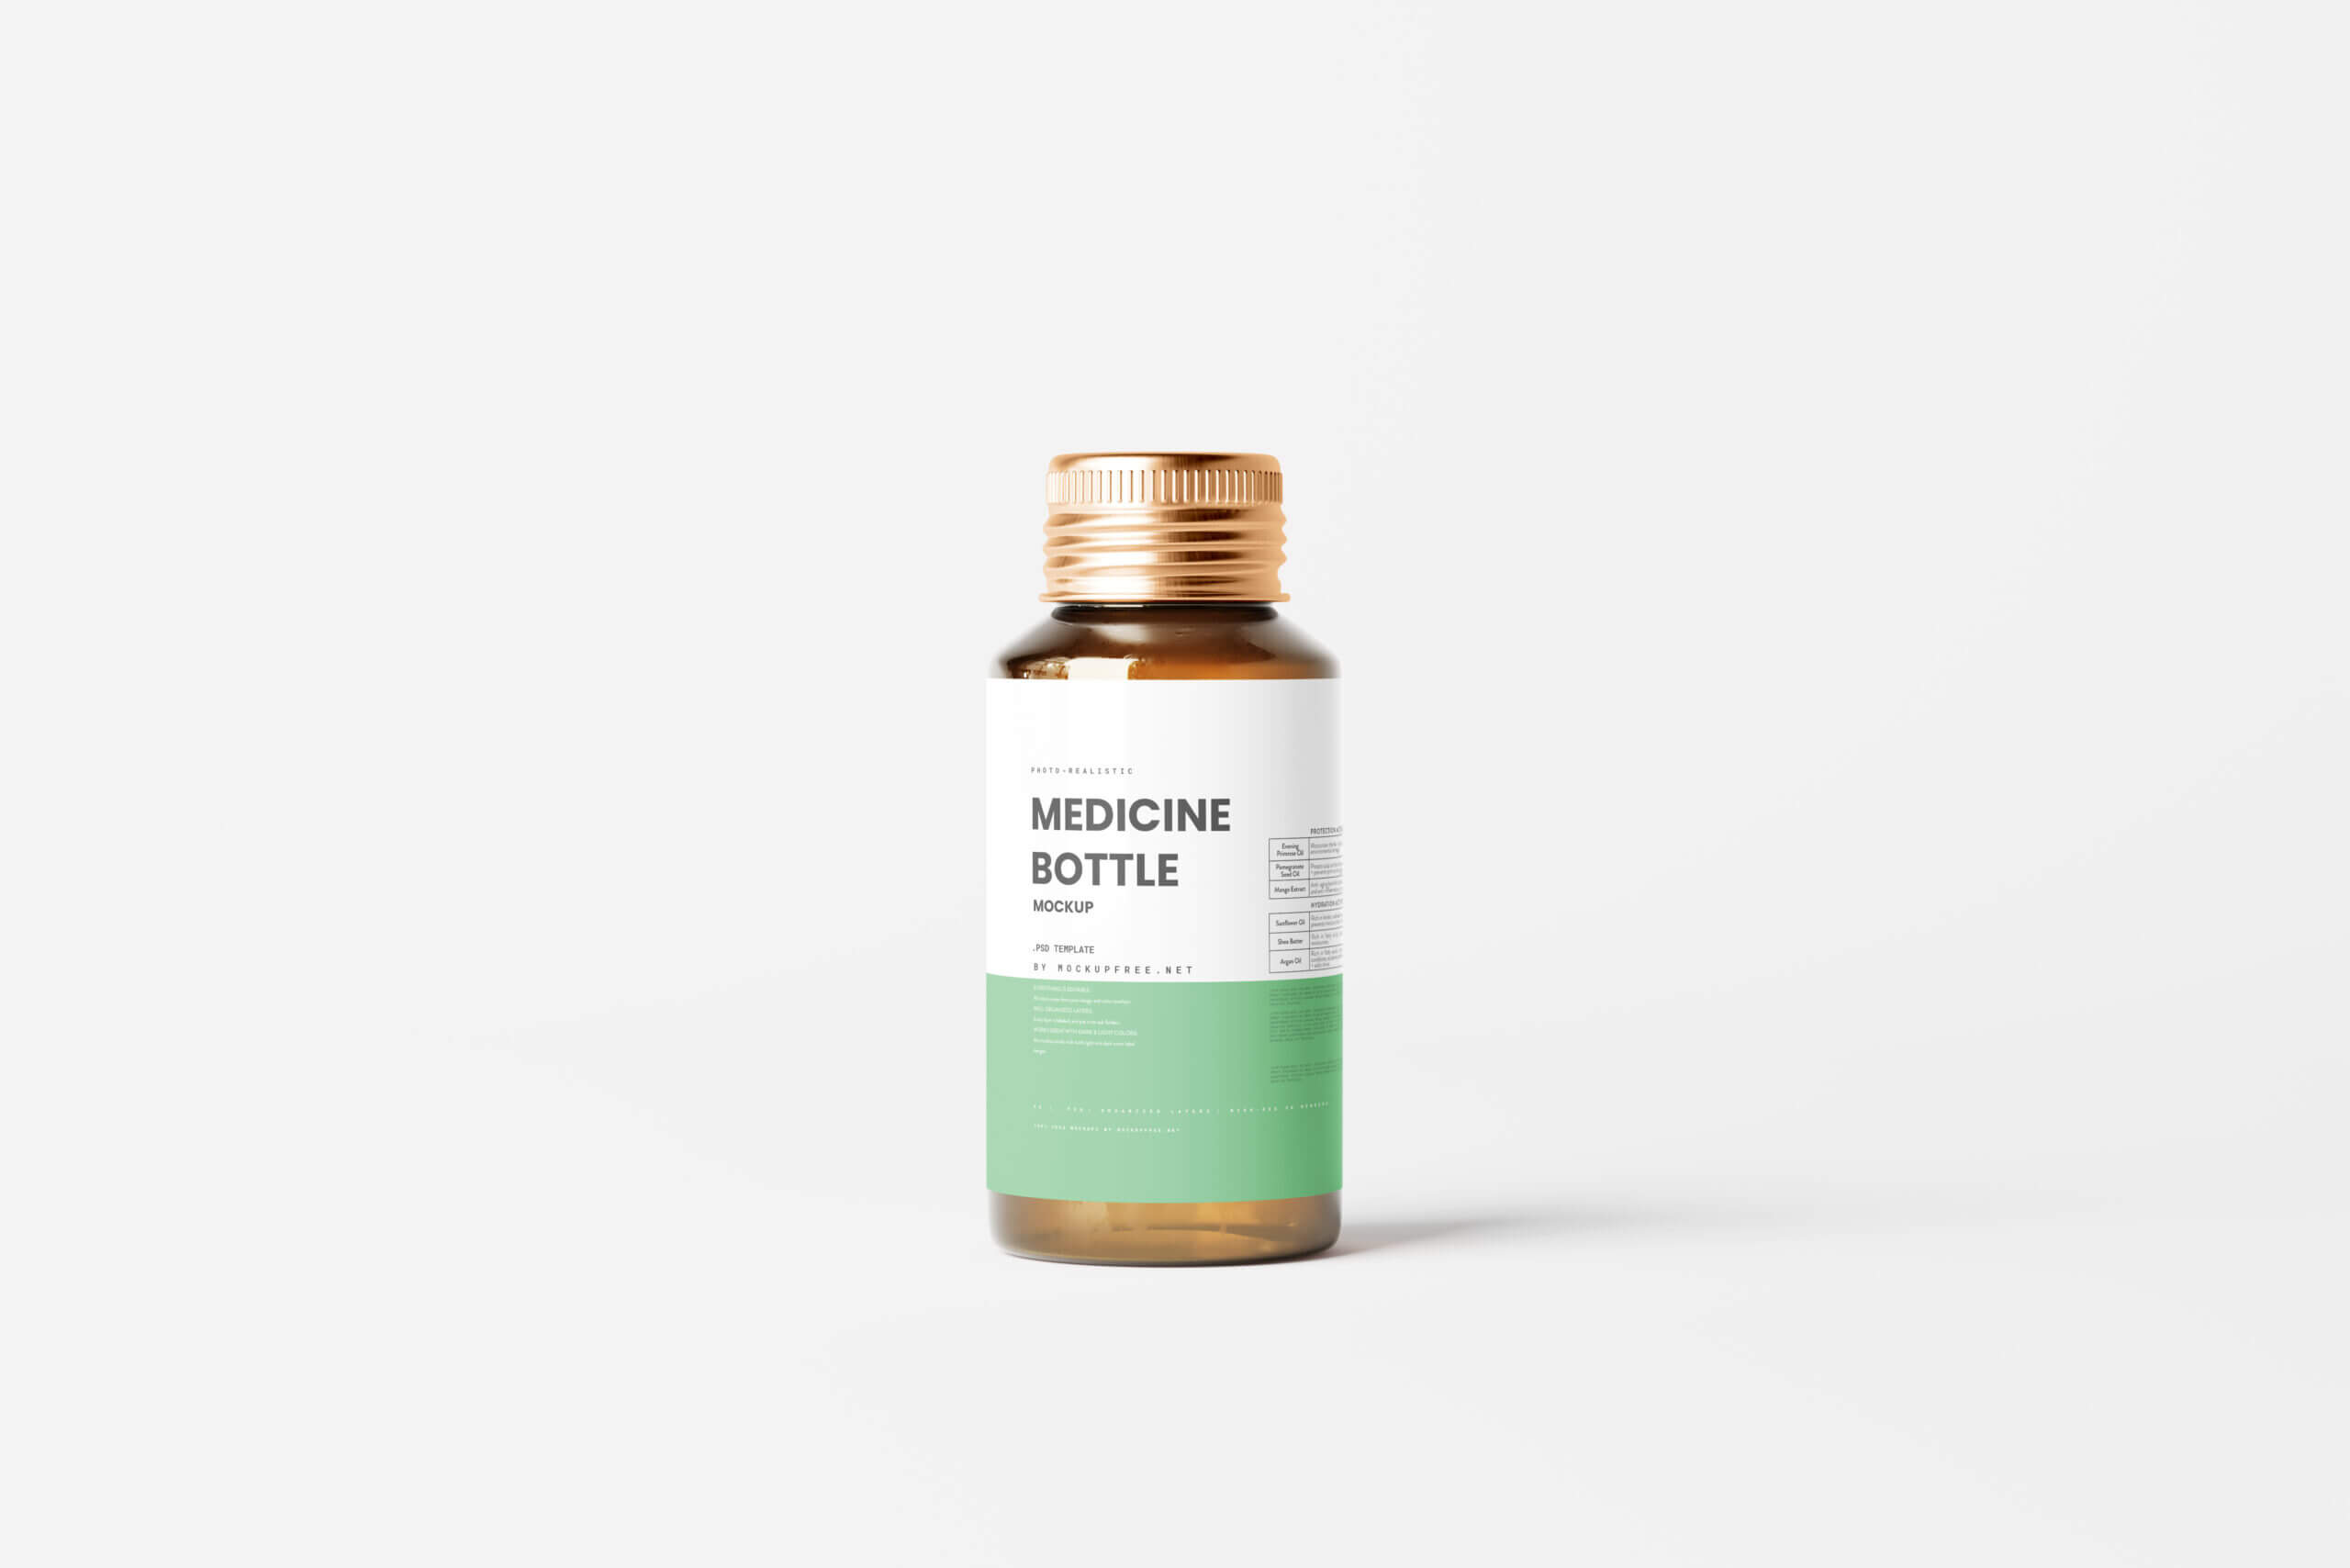 10 Free Amber Medicine Bottle With Box Mockup PSD Files2